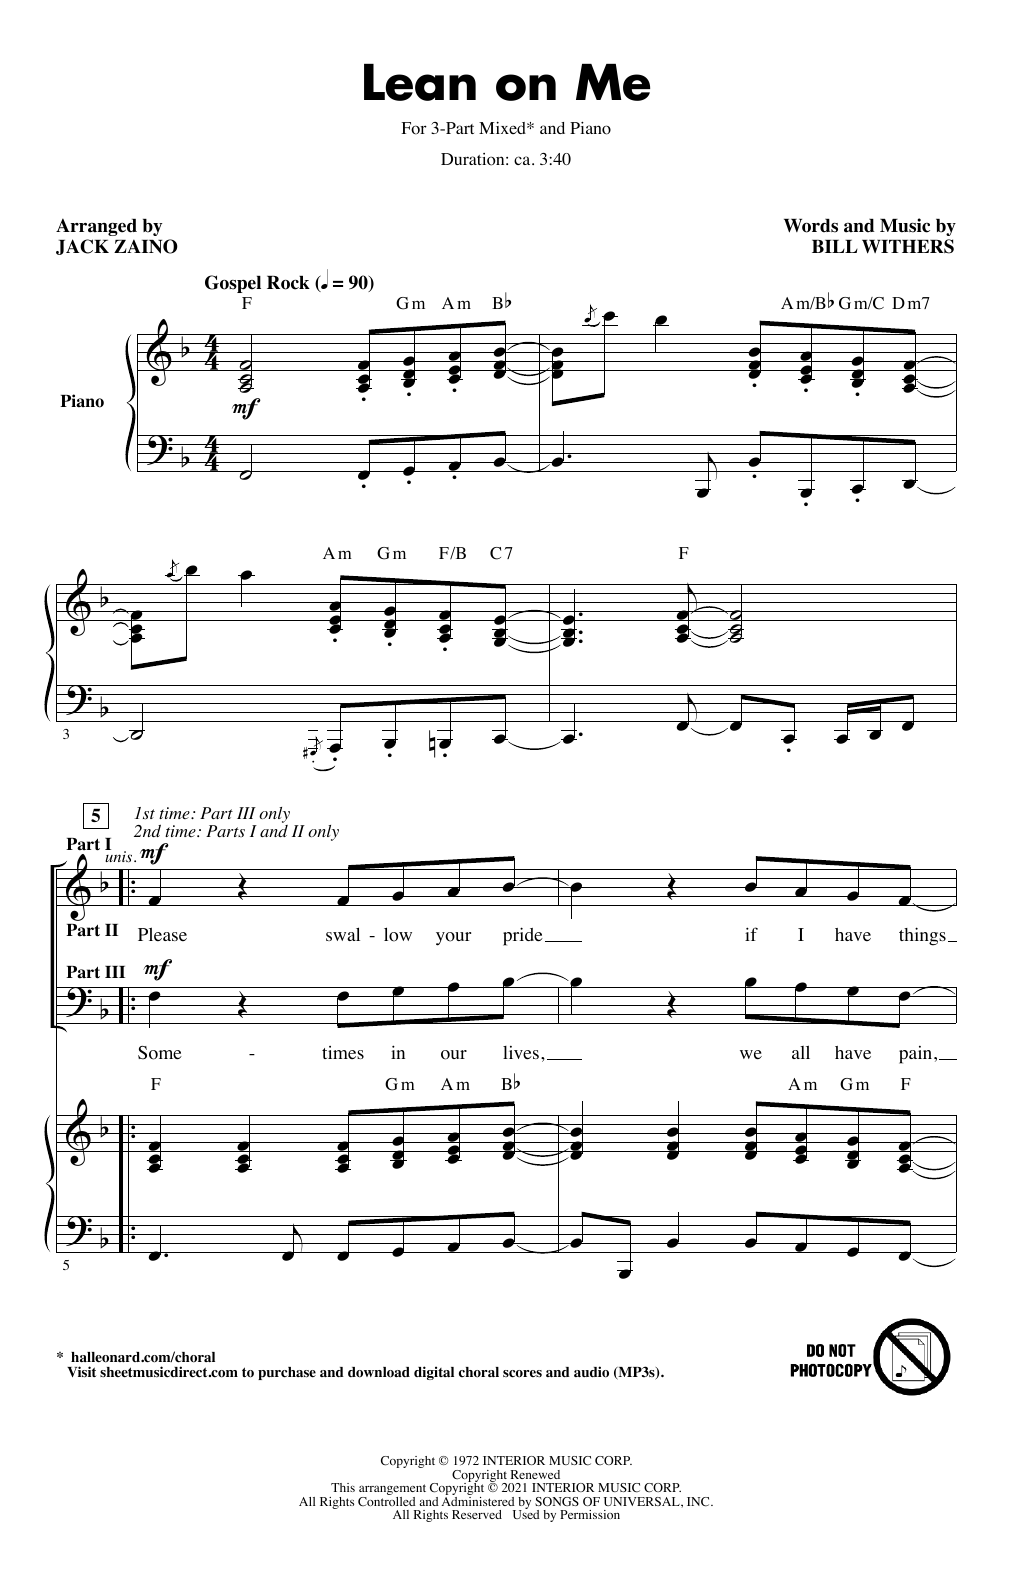 Download Bill Withers Lean On Me (arr. Jack Zaino) Sheet Music